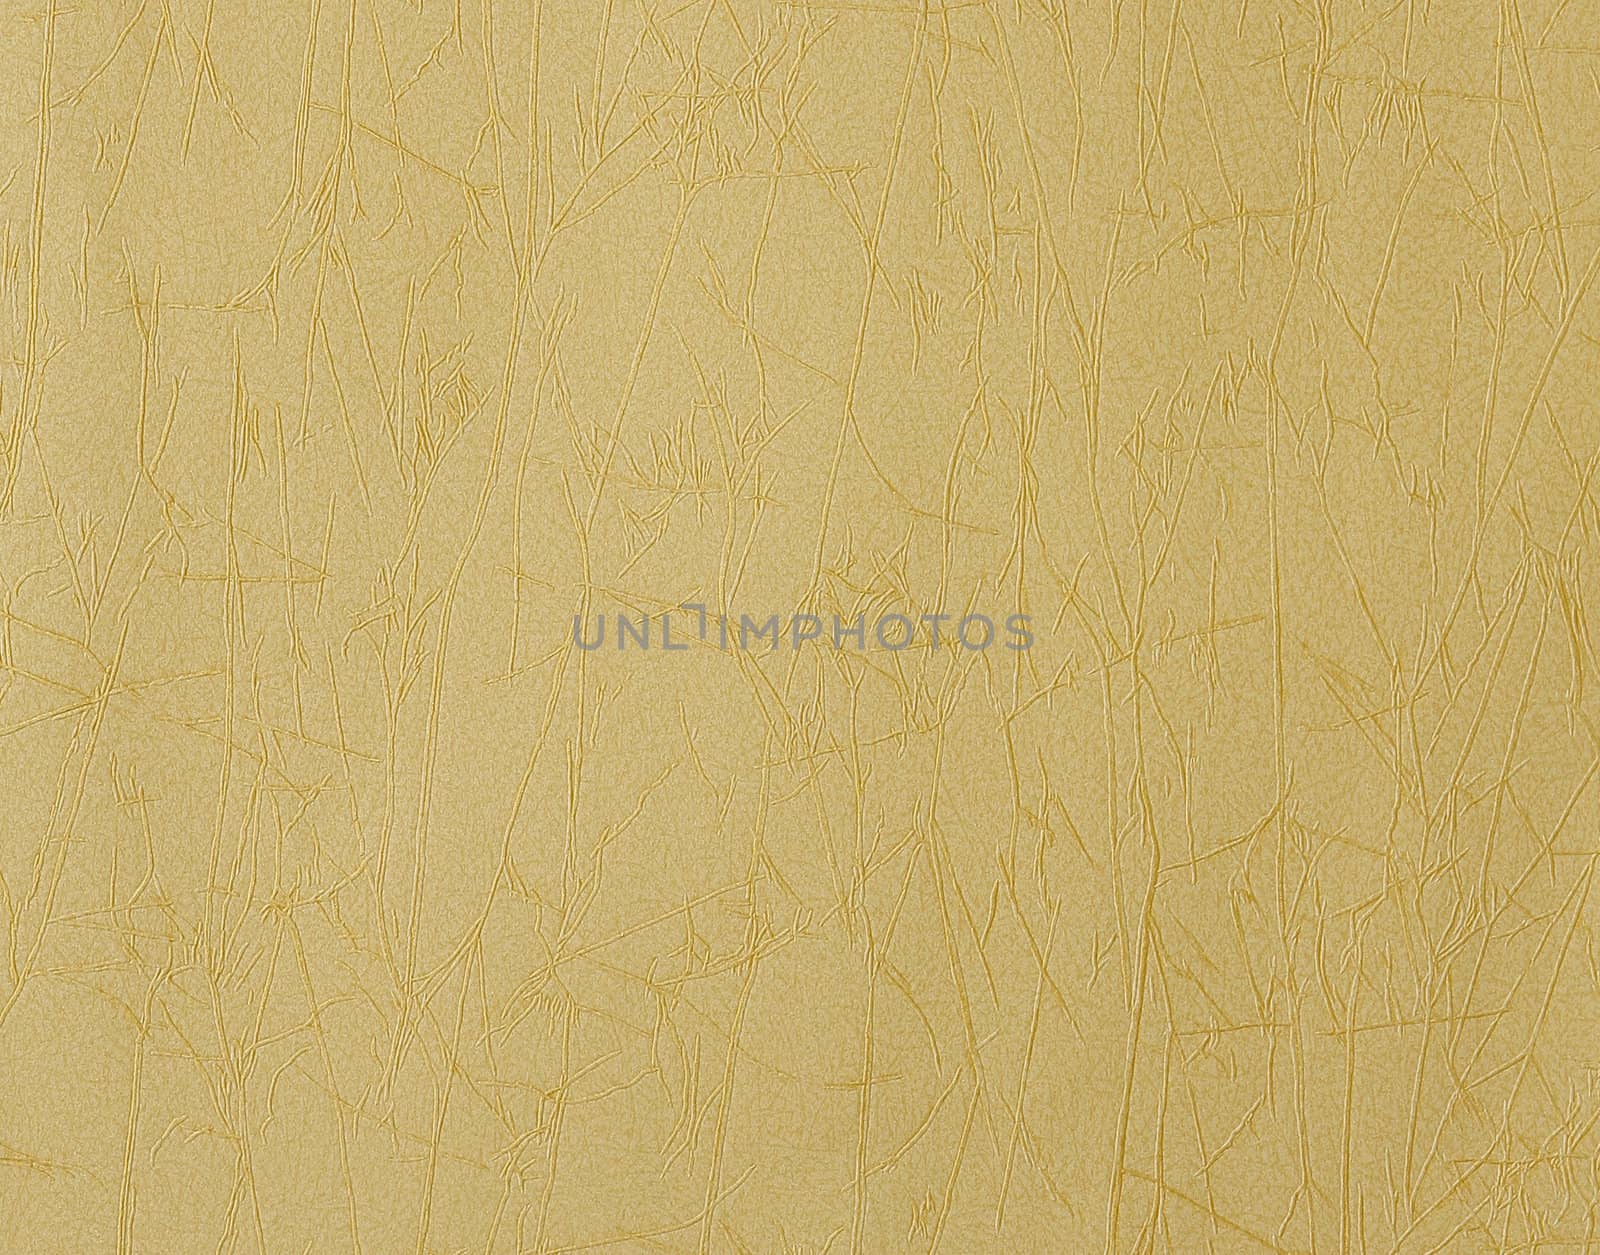 Abstract backgroung with long stripes in gold by shamtor